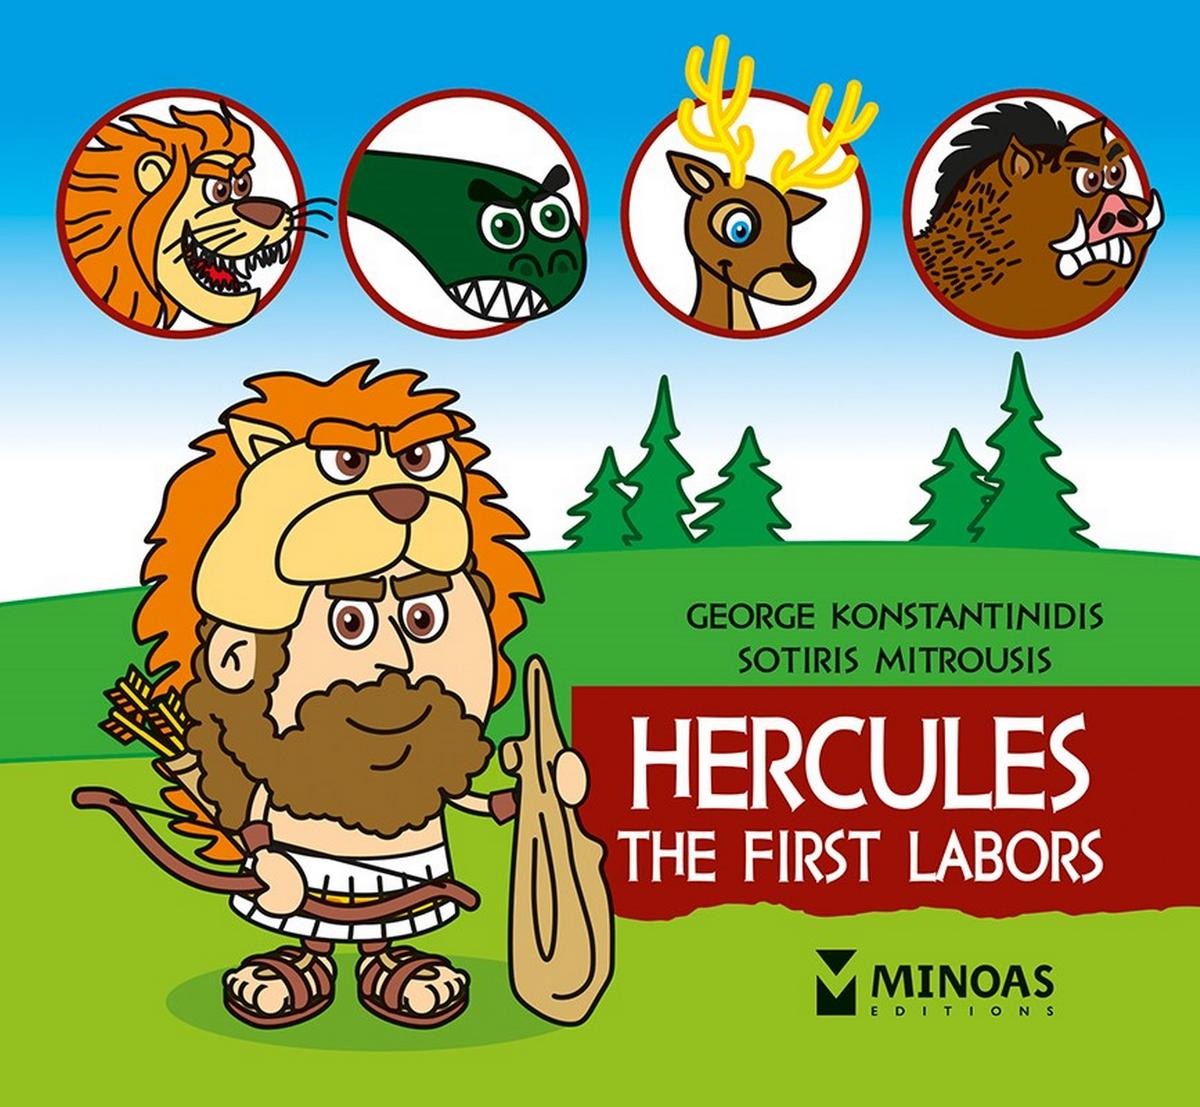 Hercules. The first labors